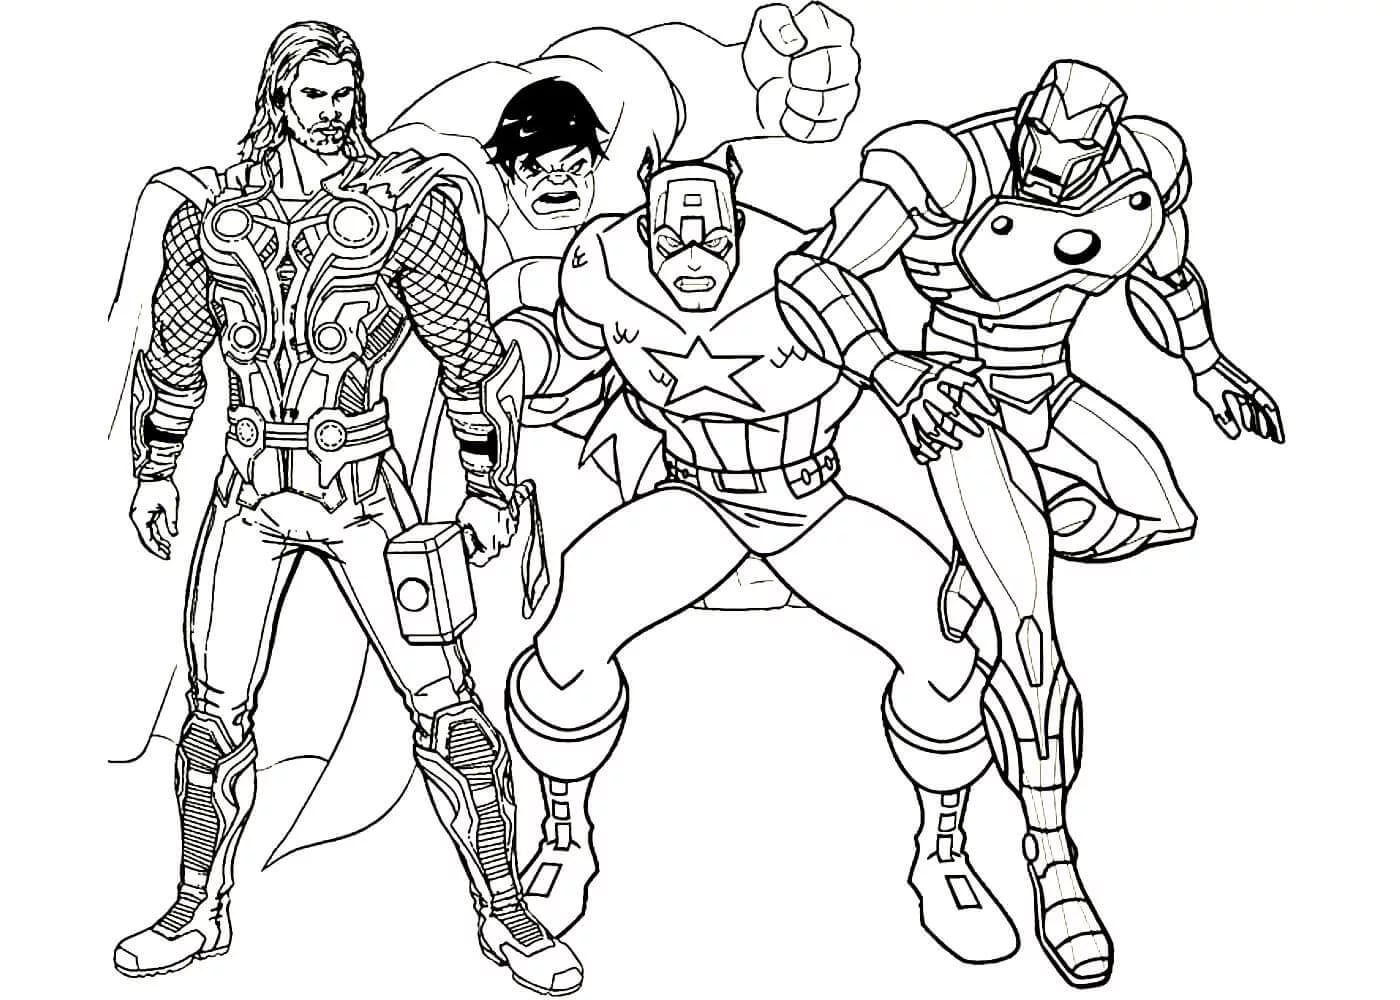 Drawing 12 of Avengers to print and color